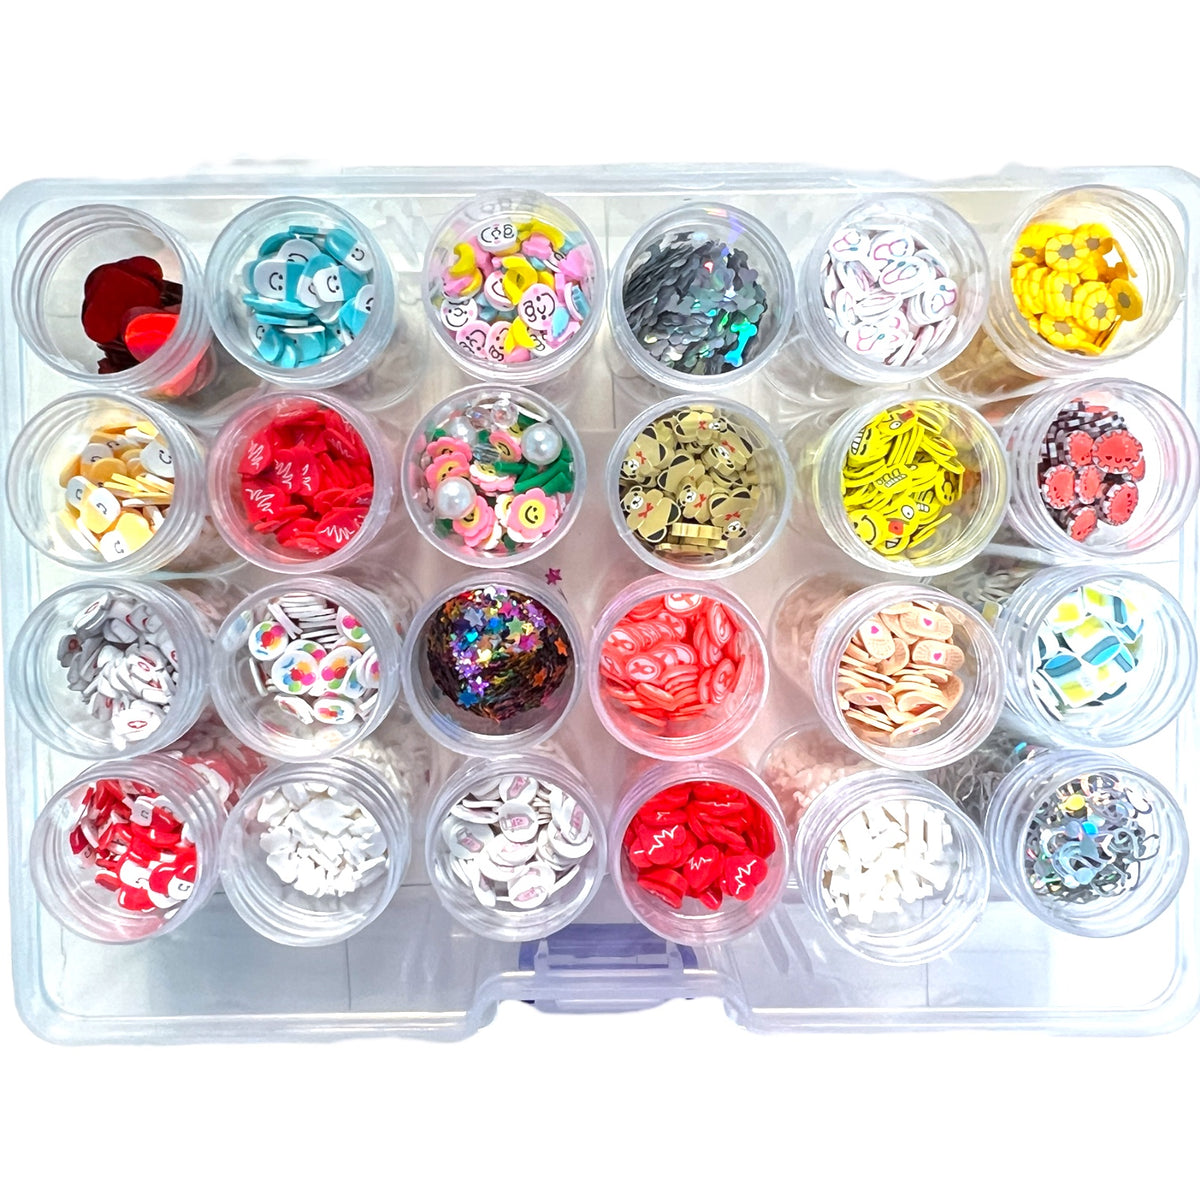 MediMix 24 Pack Polymer Clay and Glitter Shape Kit with FREE Tube Compartment Container Crafting Organizer Box